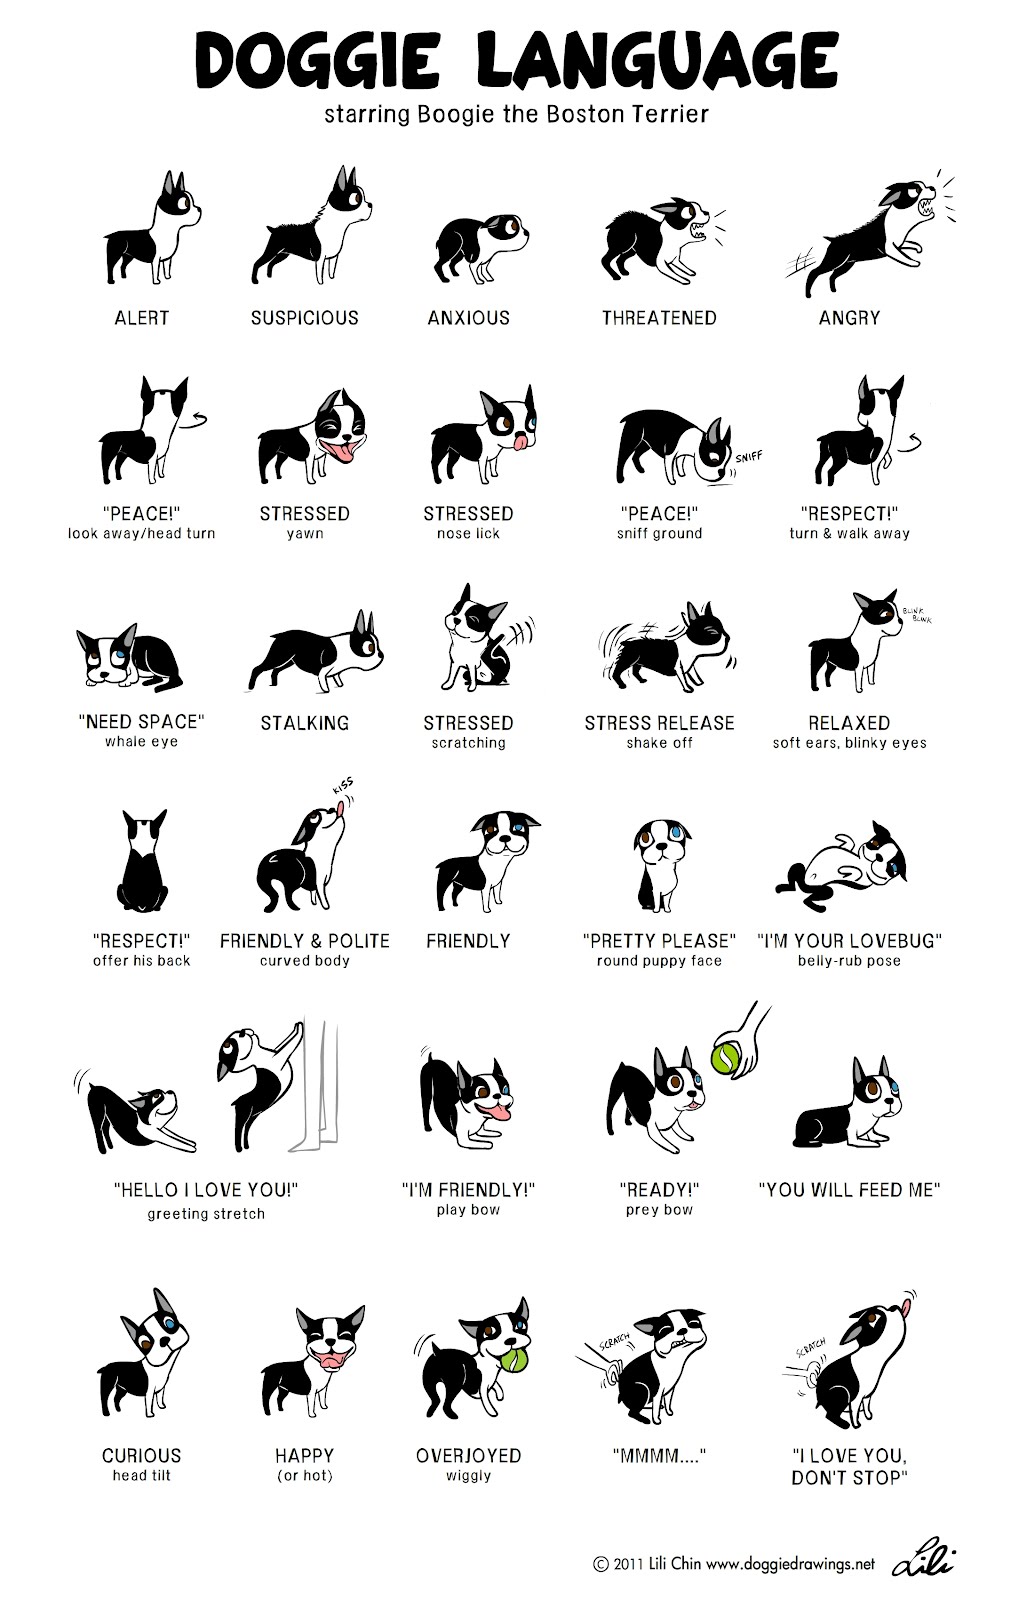 language doggie dog boston terrier lili chin behavior boogie poster chart dogs funny owner pet puppy animal posters cat speak